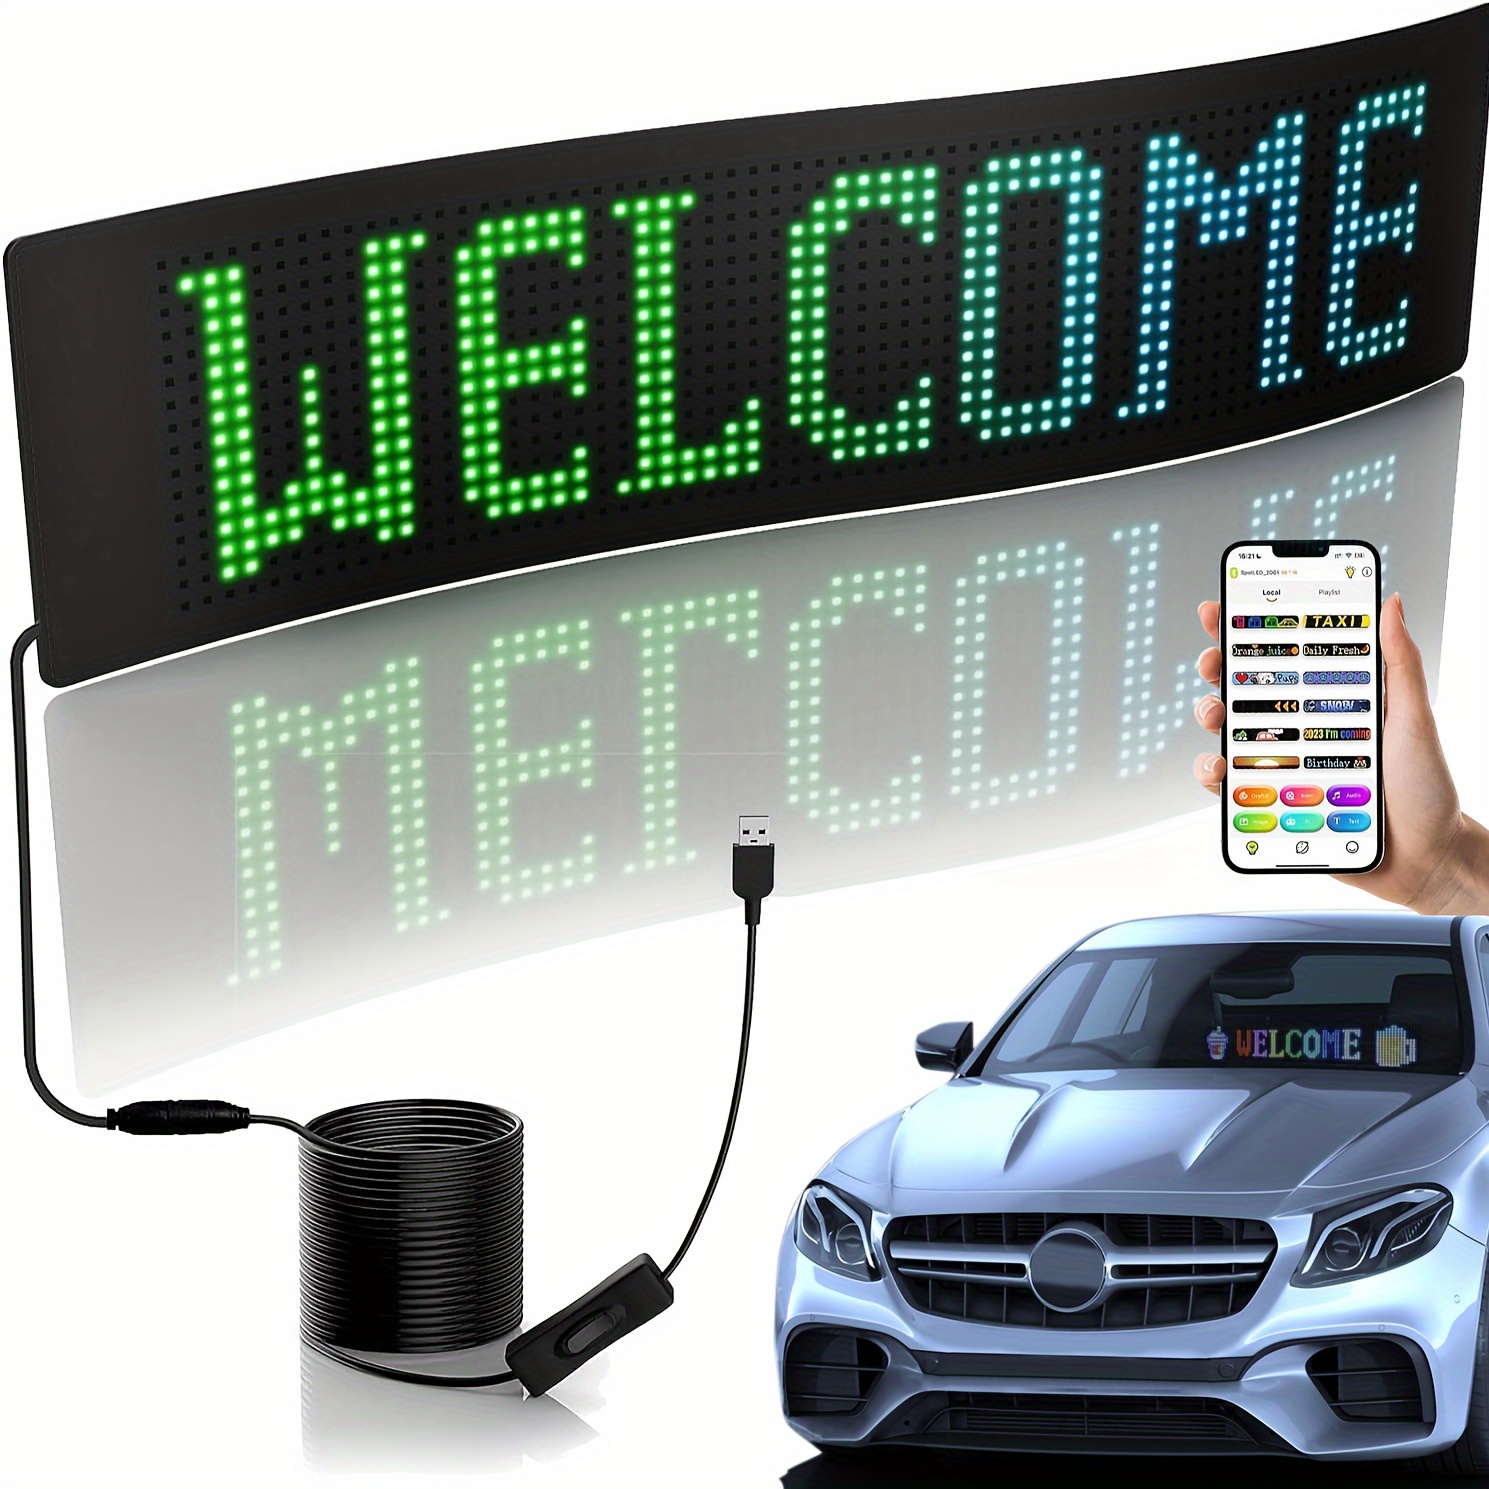 Programmable Car Signs, Programmable LED Sign for Cars